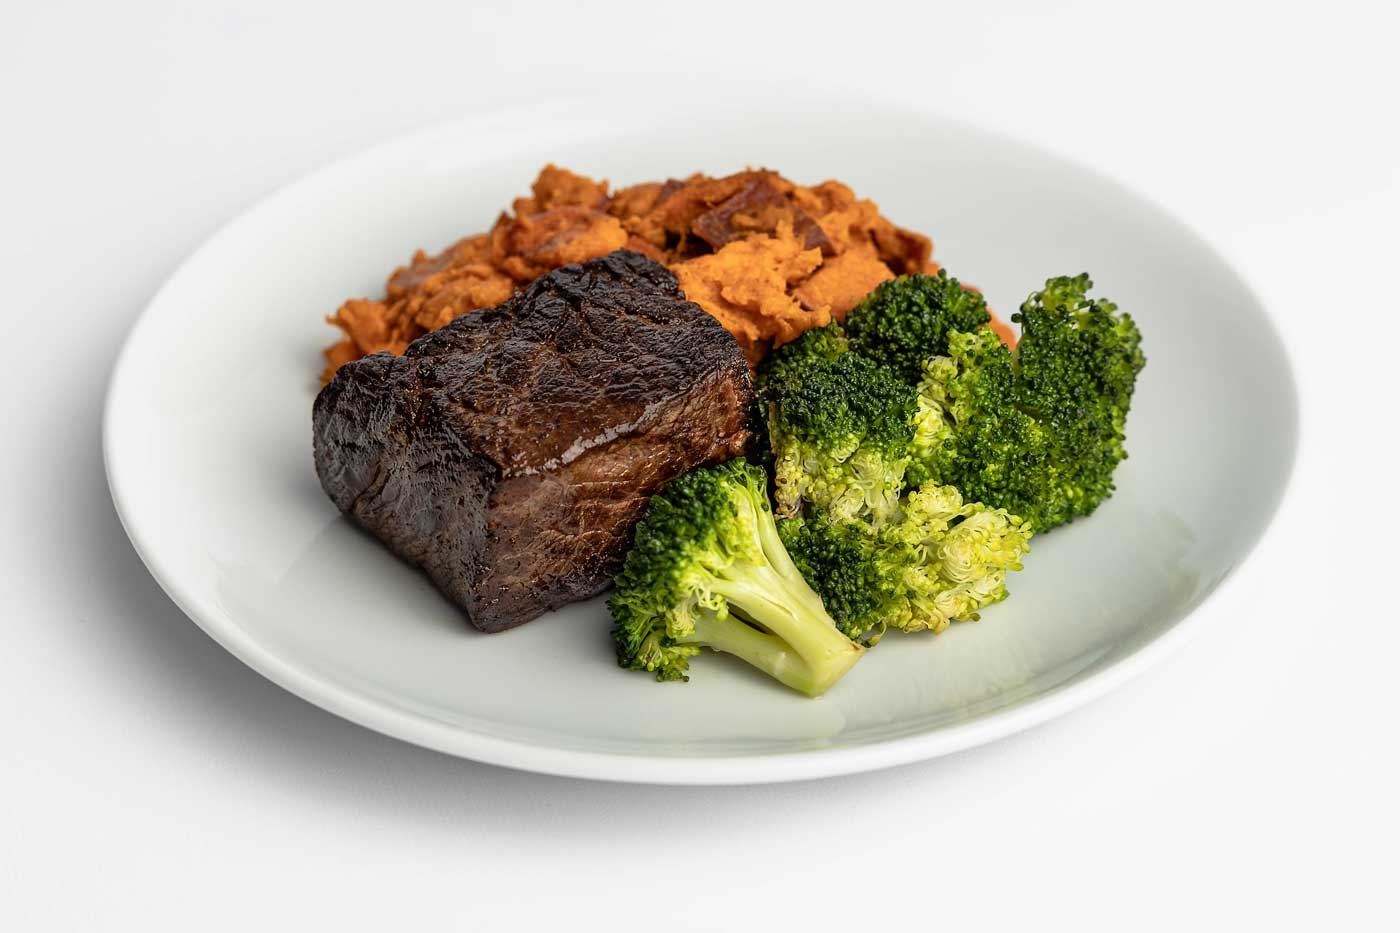 paleo-meal-delivery-grass-fed-steak-with-organic-veggies-and-sweet-potatoes